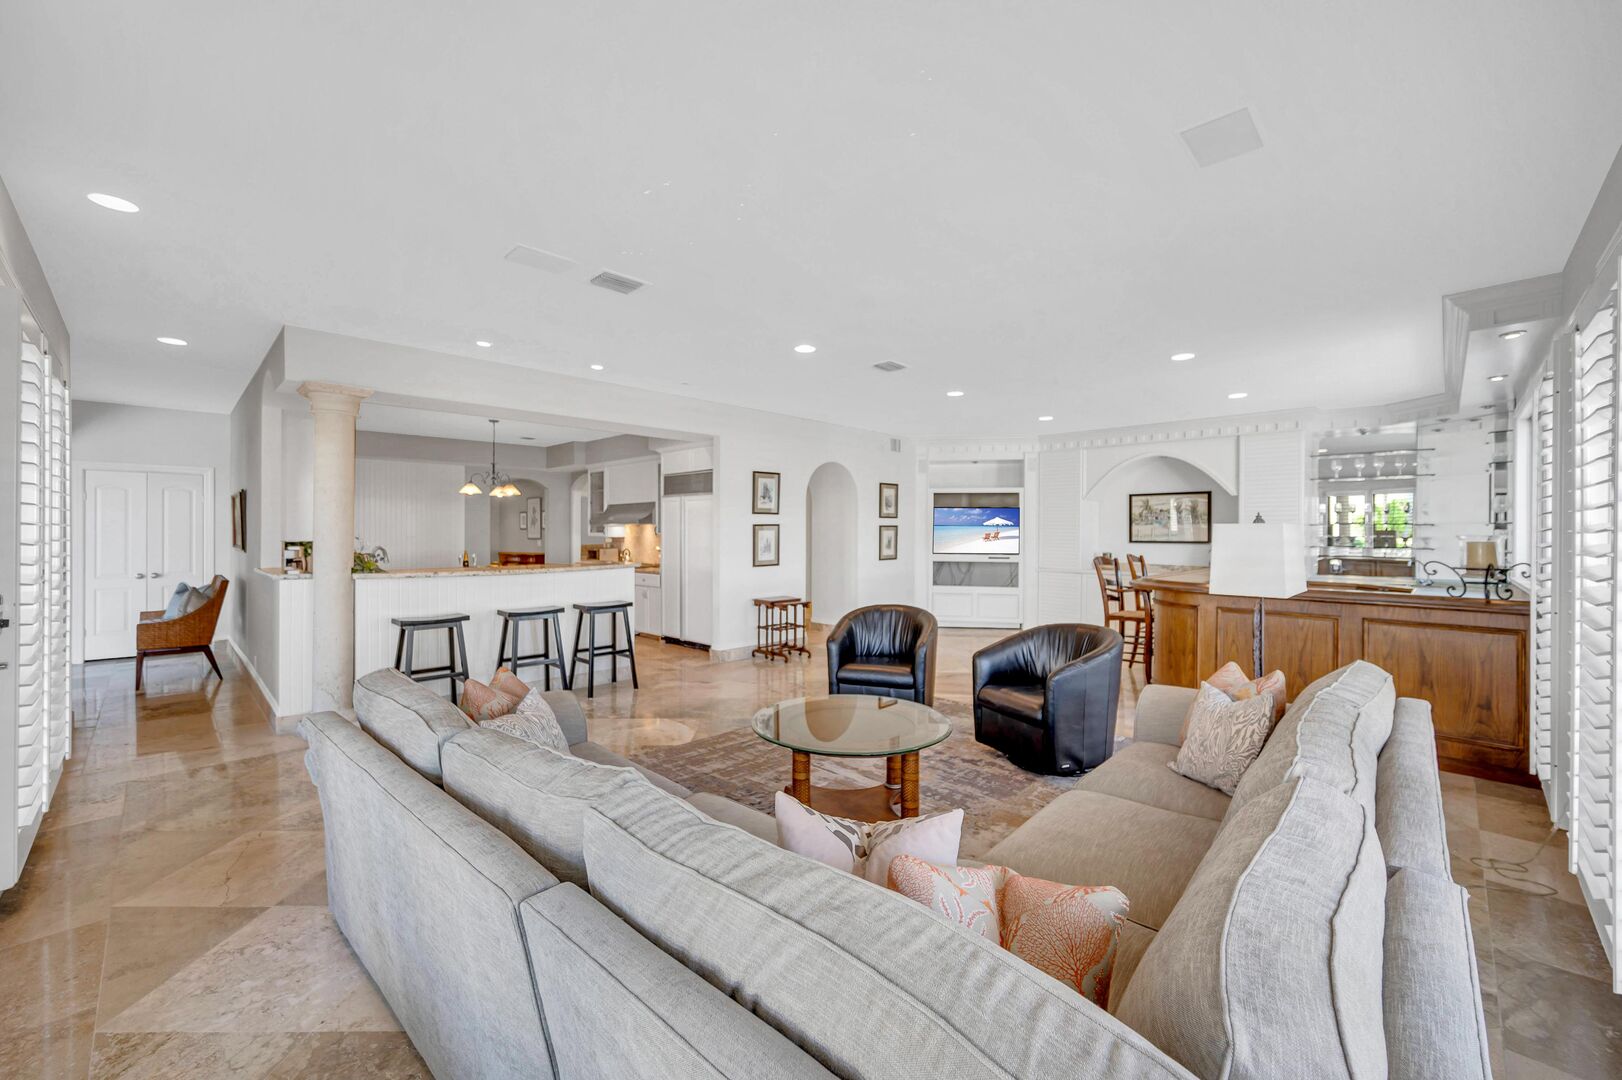 The family room also features a wet bar, smart TV and access to the heated pool.